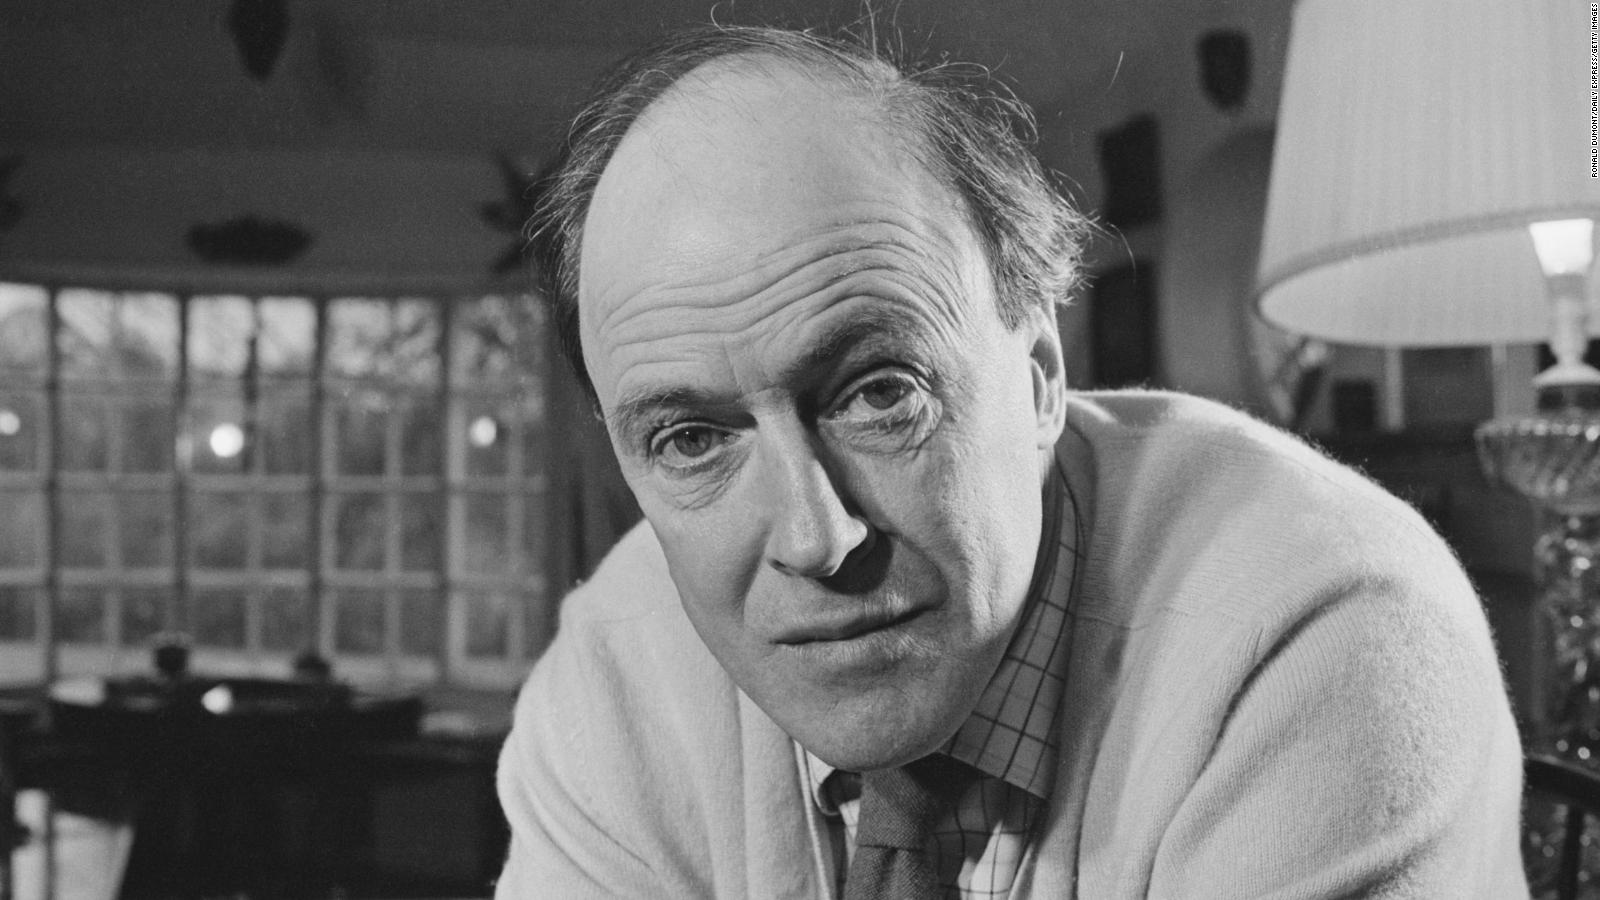 25 interesting facts about Roald Dahl